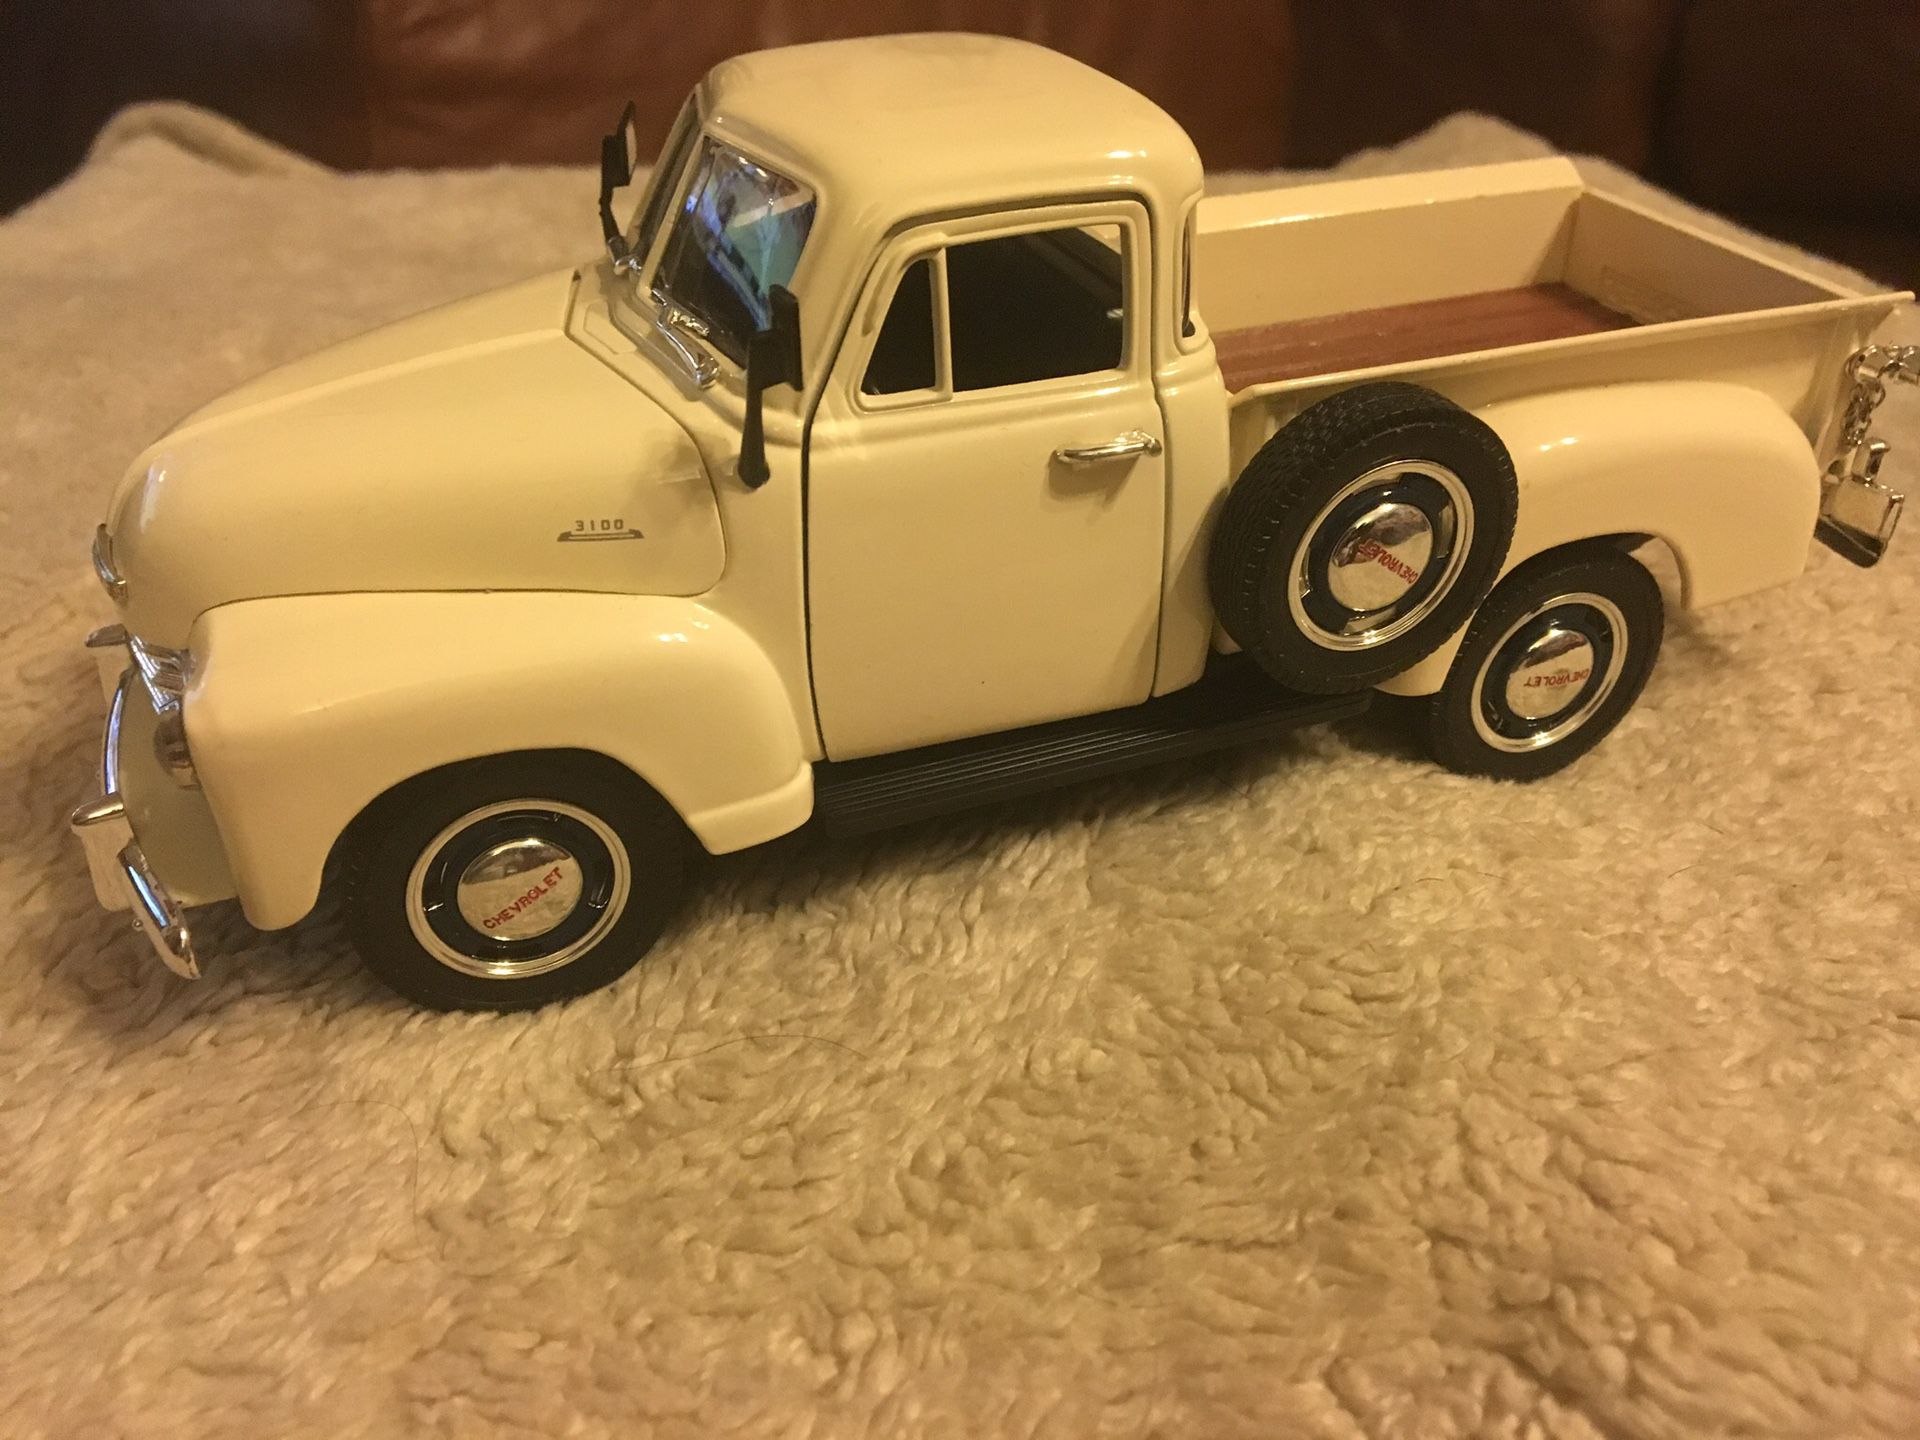 Pair of new 1/24 scale ‘53 Chevy pickups